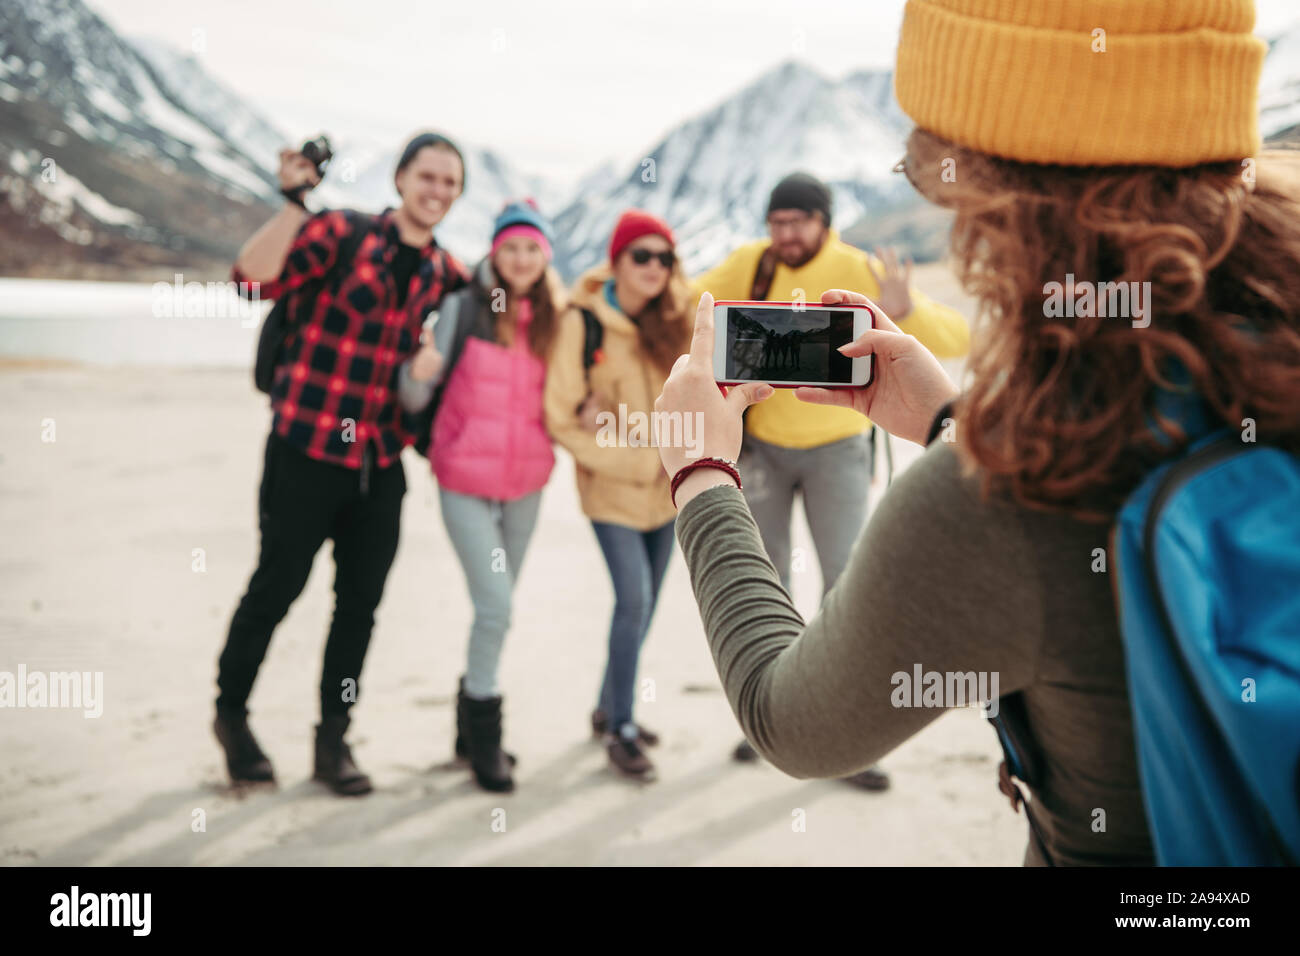 Group of happy friends hikers are taking photo together in mountains area Stock Photo